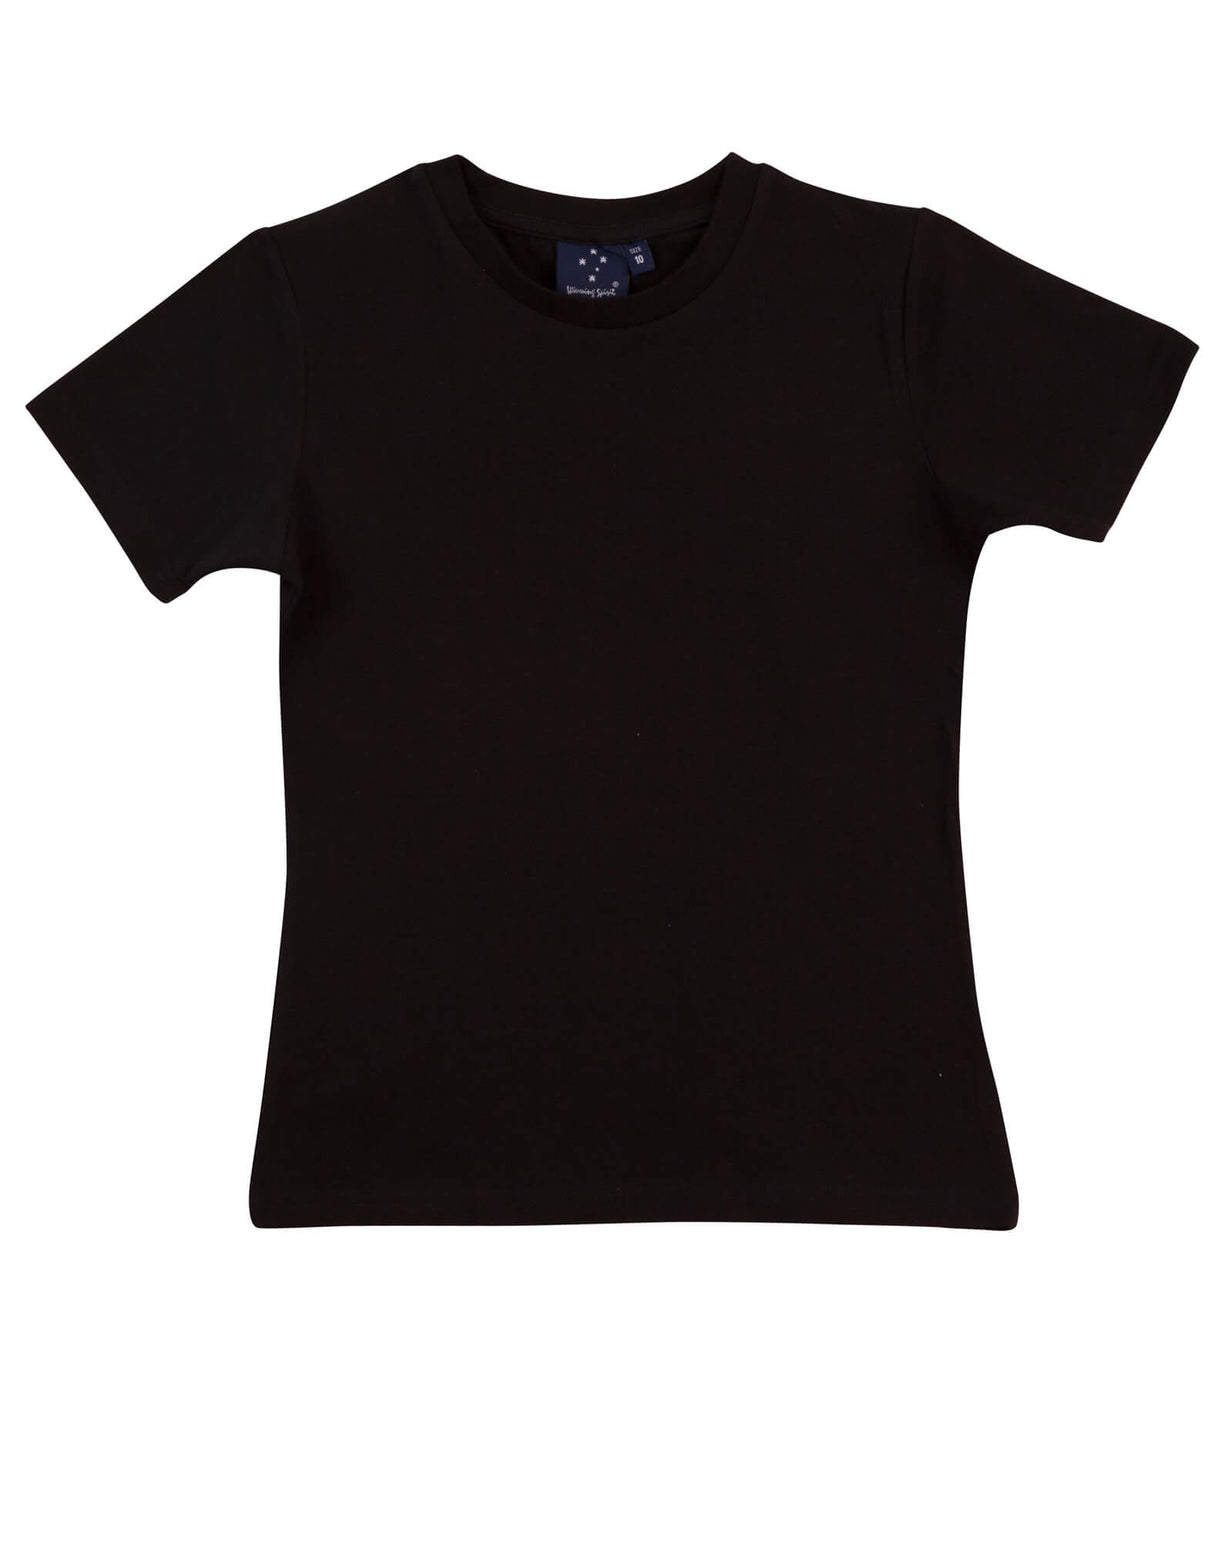 TS15 Cotton Stretch Fitted Tee Ladies